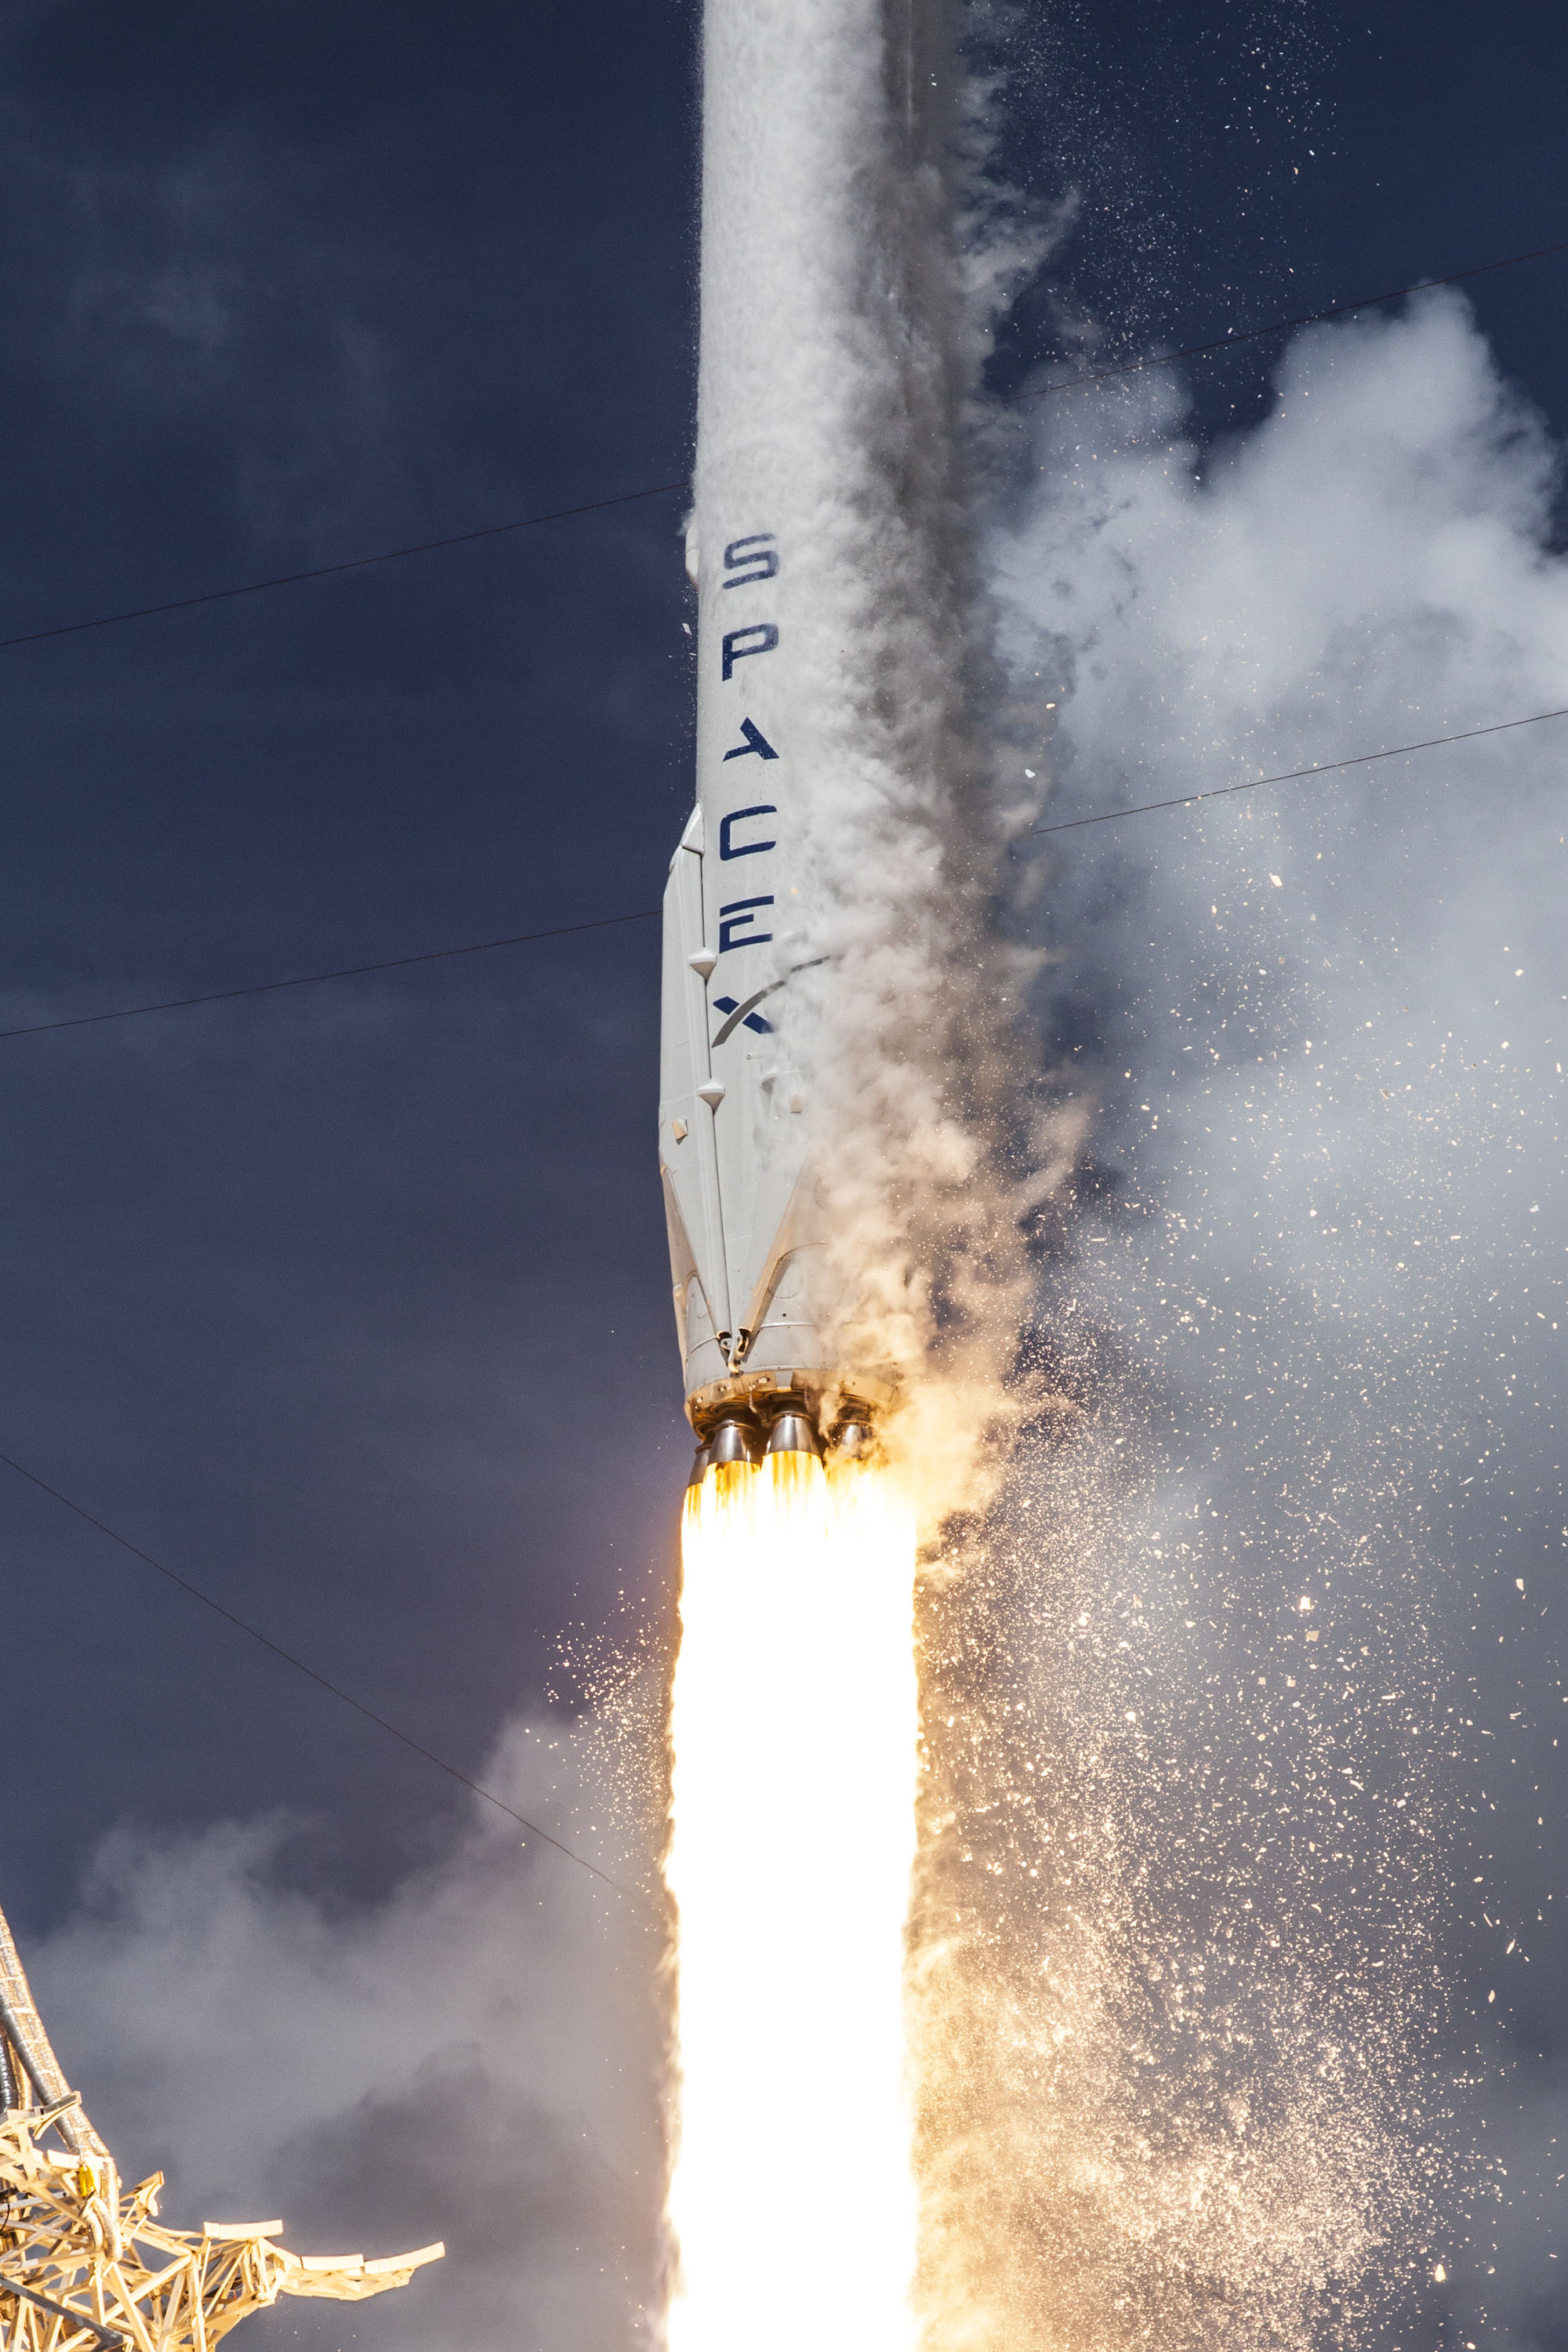 SPACEX COMPLETES 100TH MERLIN 1D ENGINE SpaceX